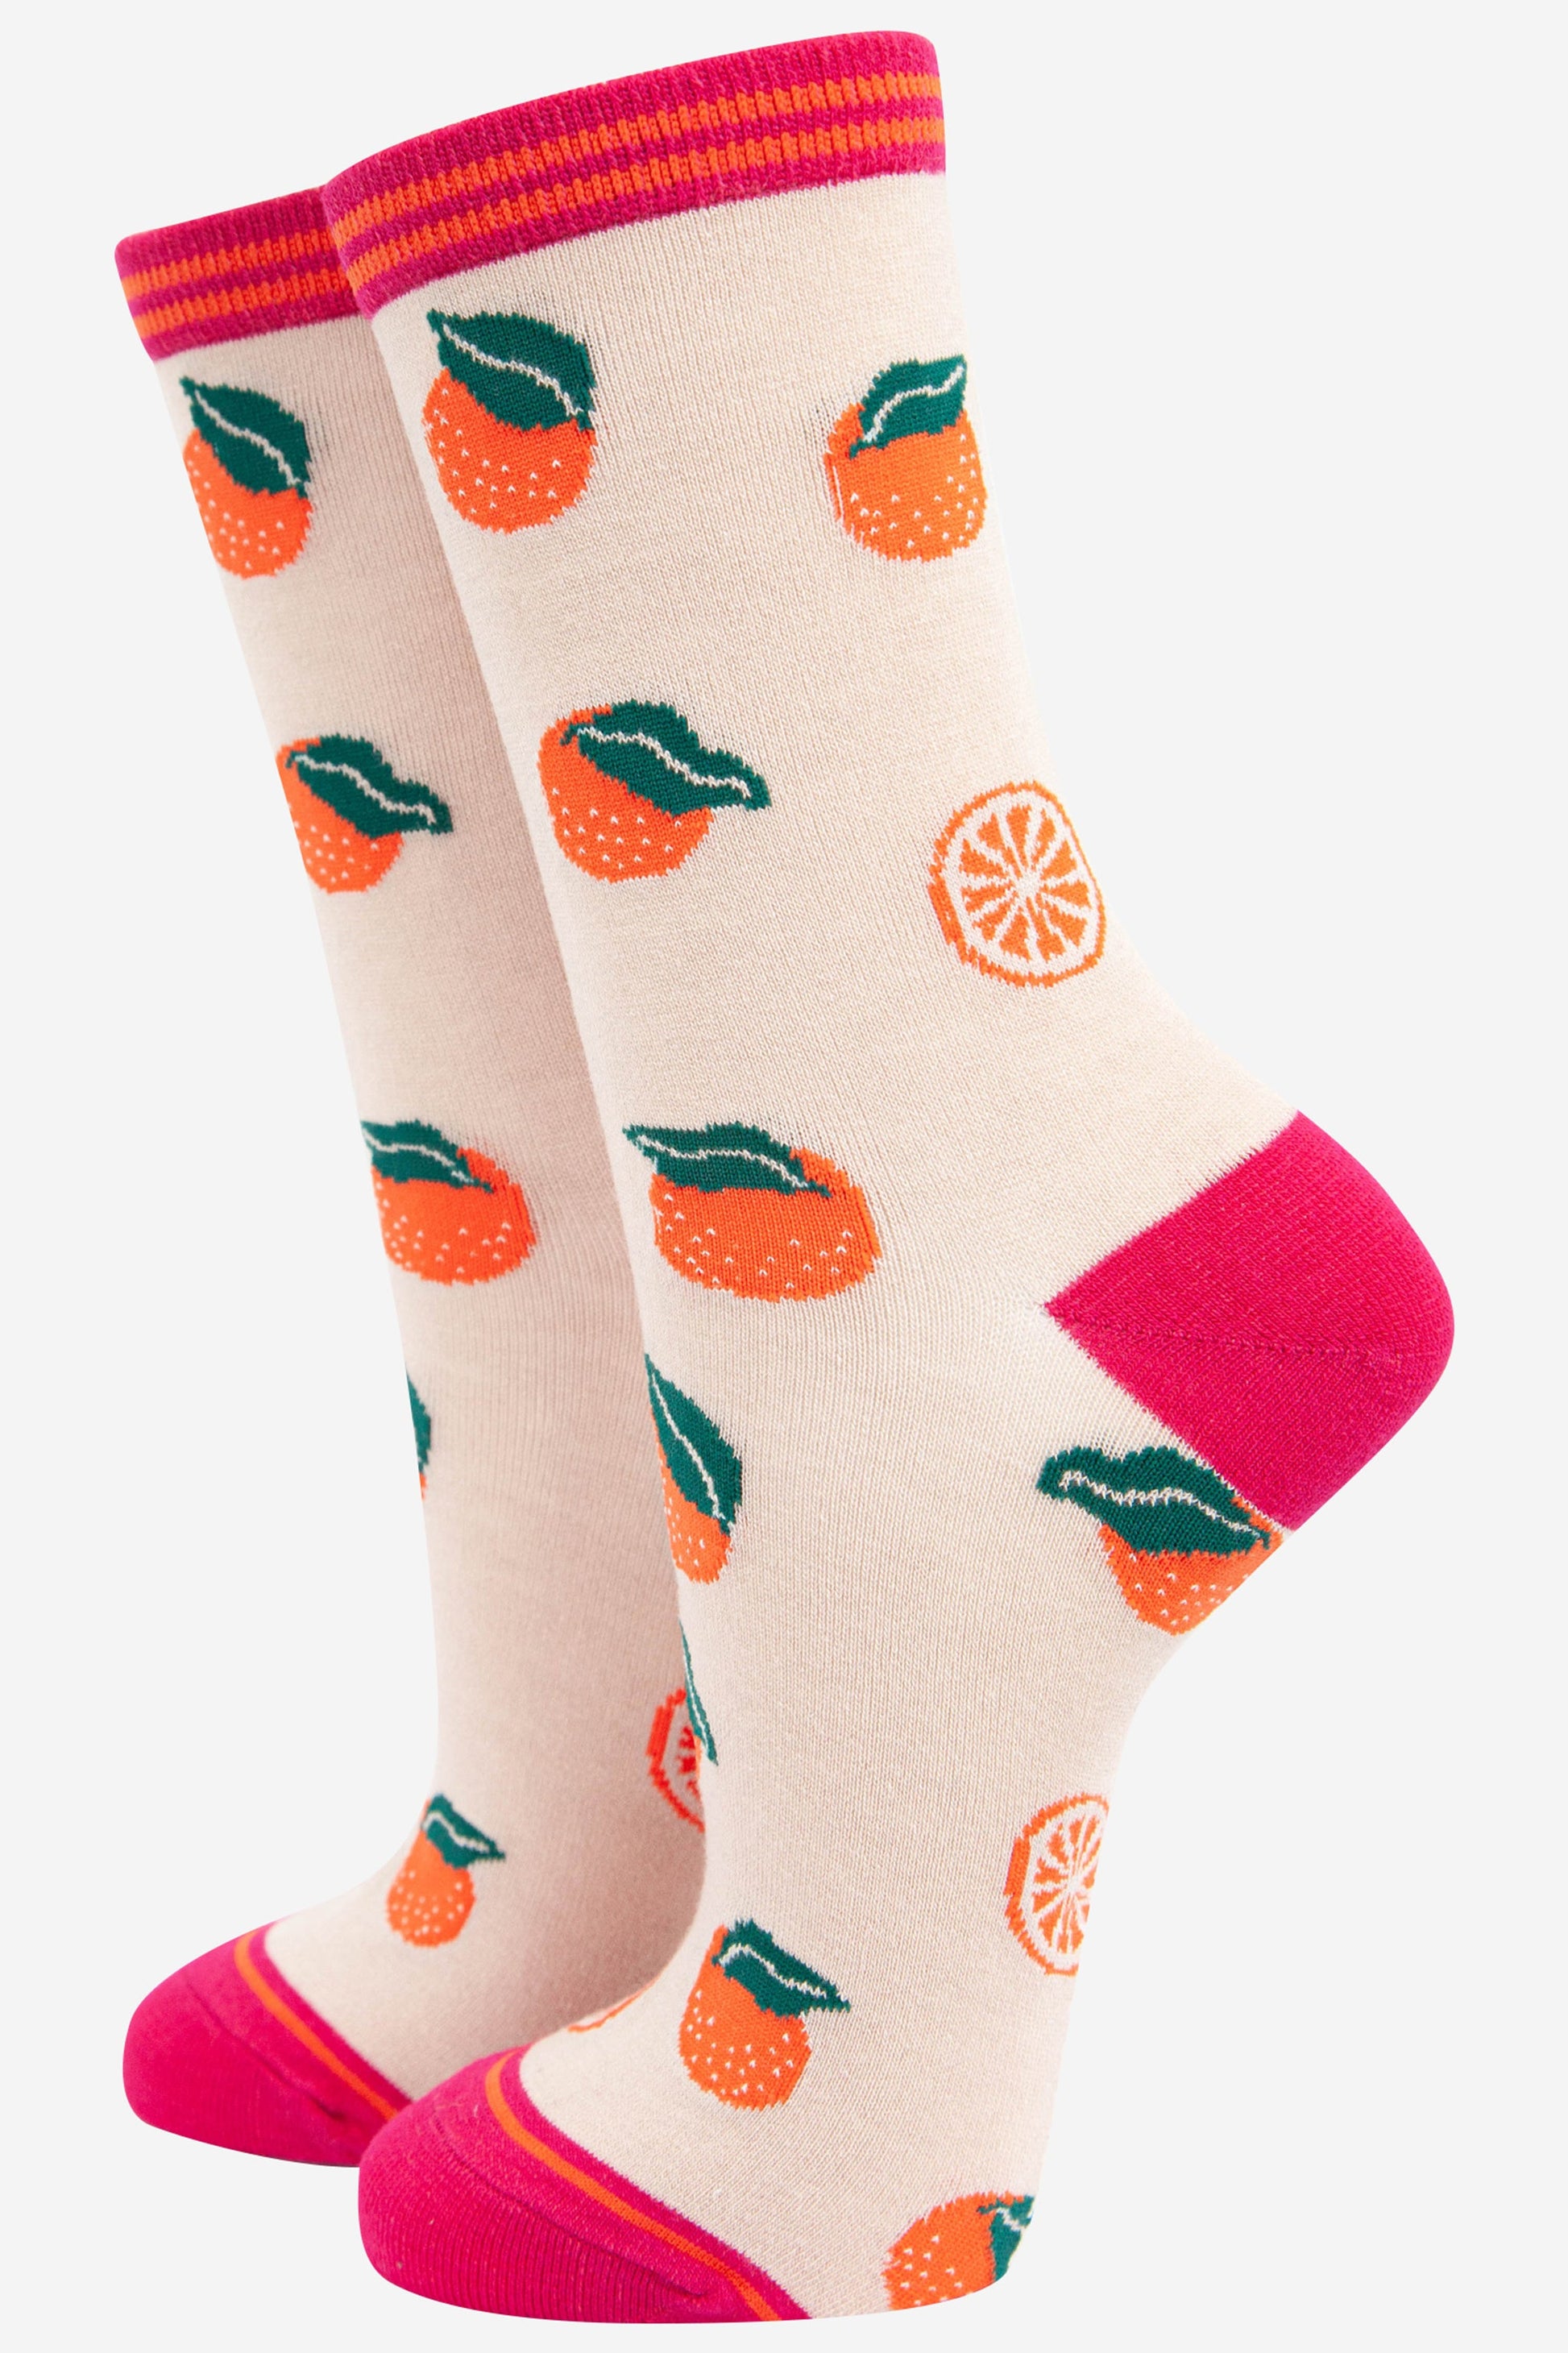 cream and pink bamboo socks with an all over pattern or oranges and orange slices